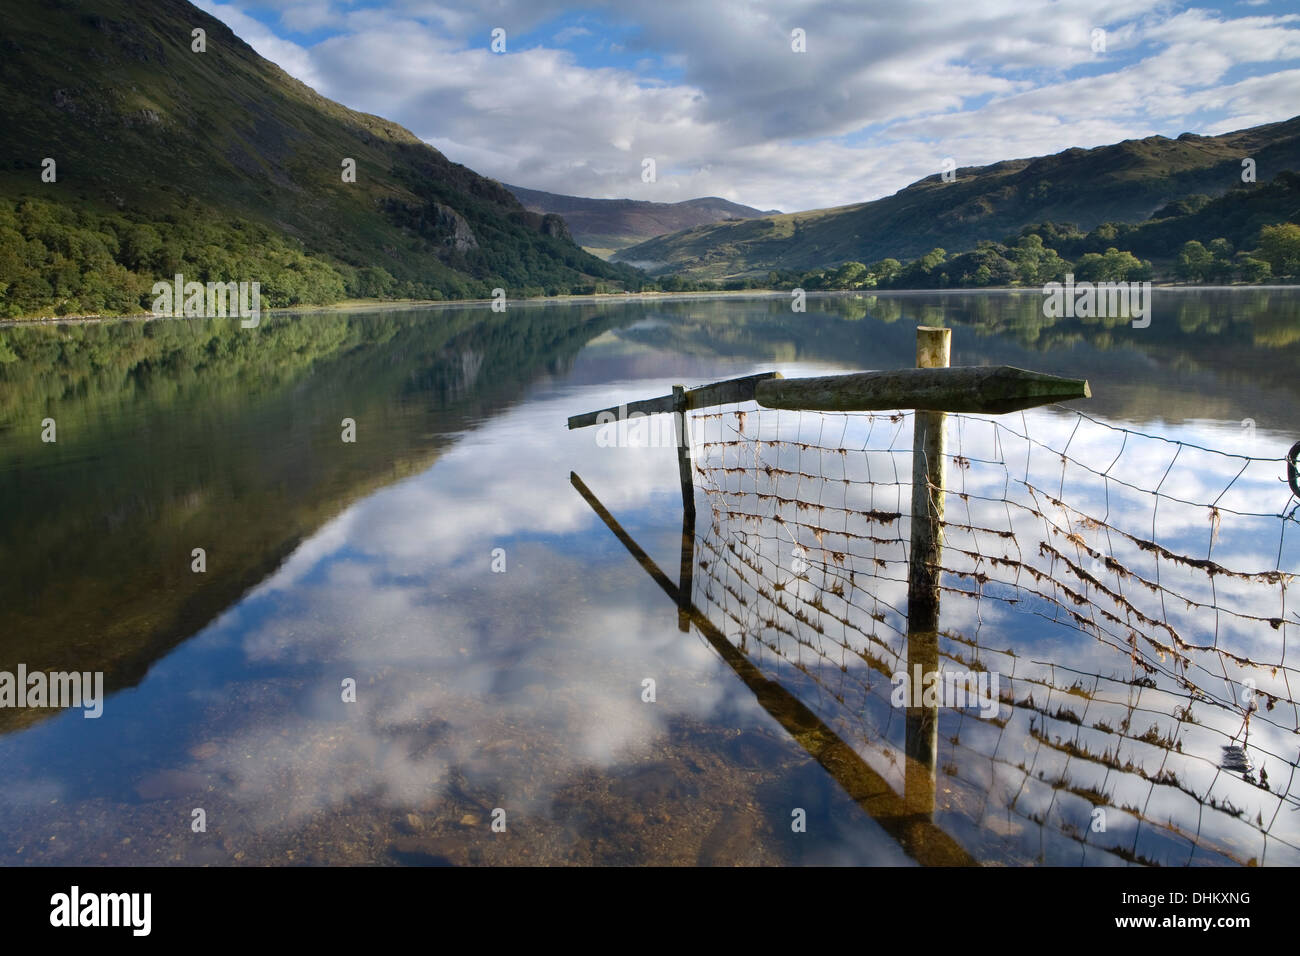 A fence and reflection going into Llyn Gwynant. The mist rising over the lake partially obscures Gallt y Wenallt, Nant gwynant. Stock Photo